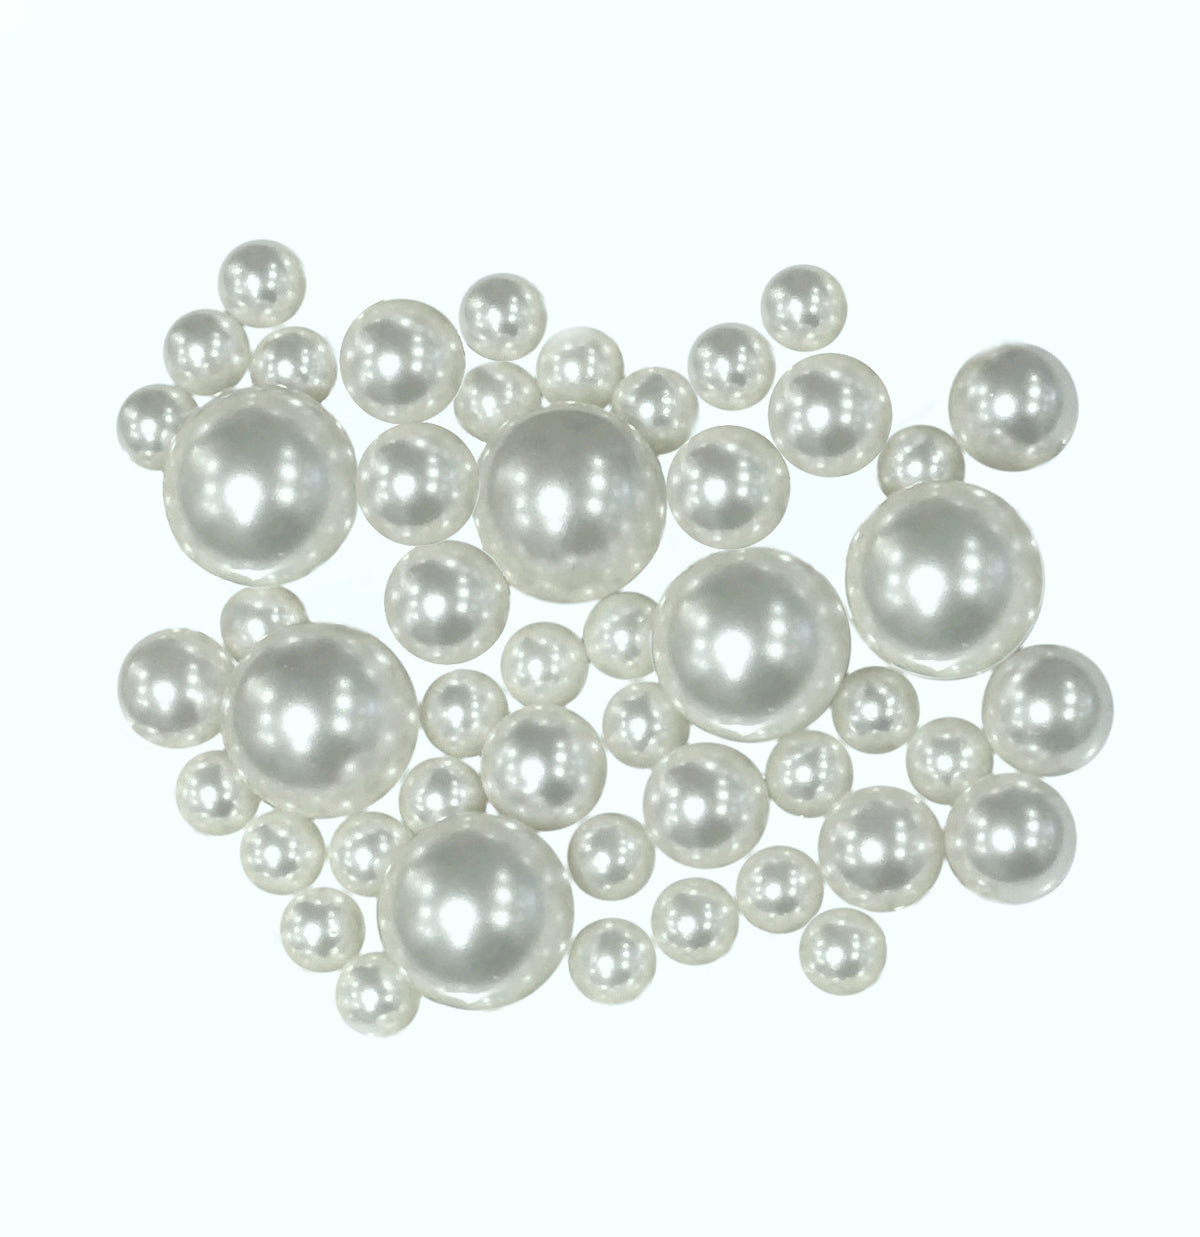 50 Floating White Pearls-Fills 1 Gallon of Floating Pearls & Transparent Gels for Floating Effect-With Exclusive Measured Gels Prep Bag-Option: 3 Submersible Fairy Lights Strings